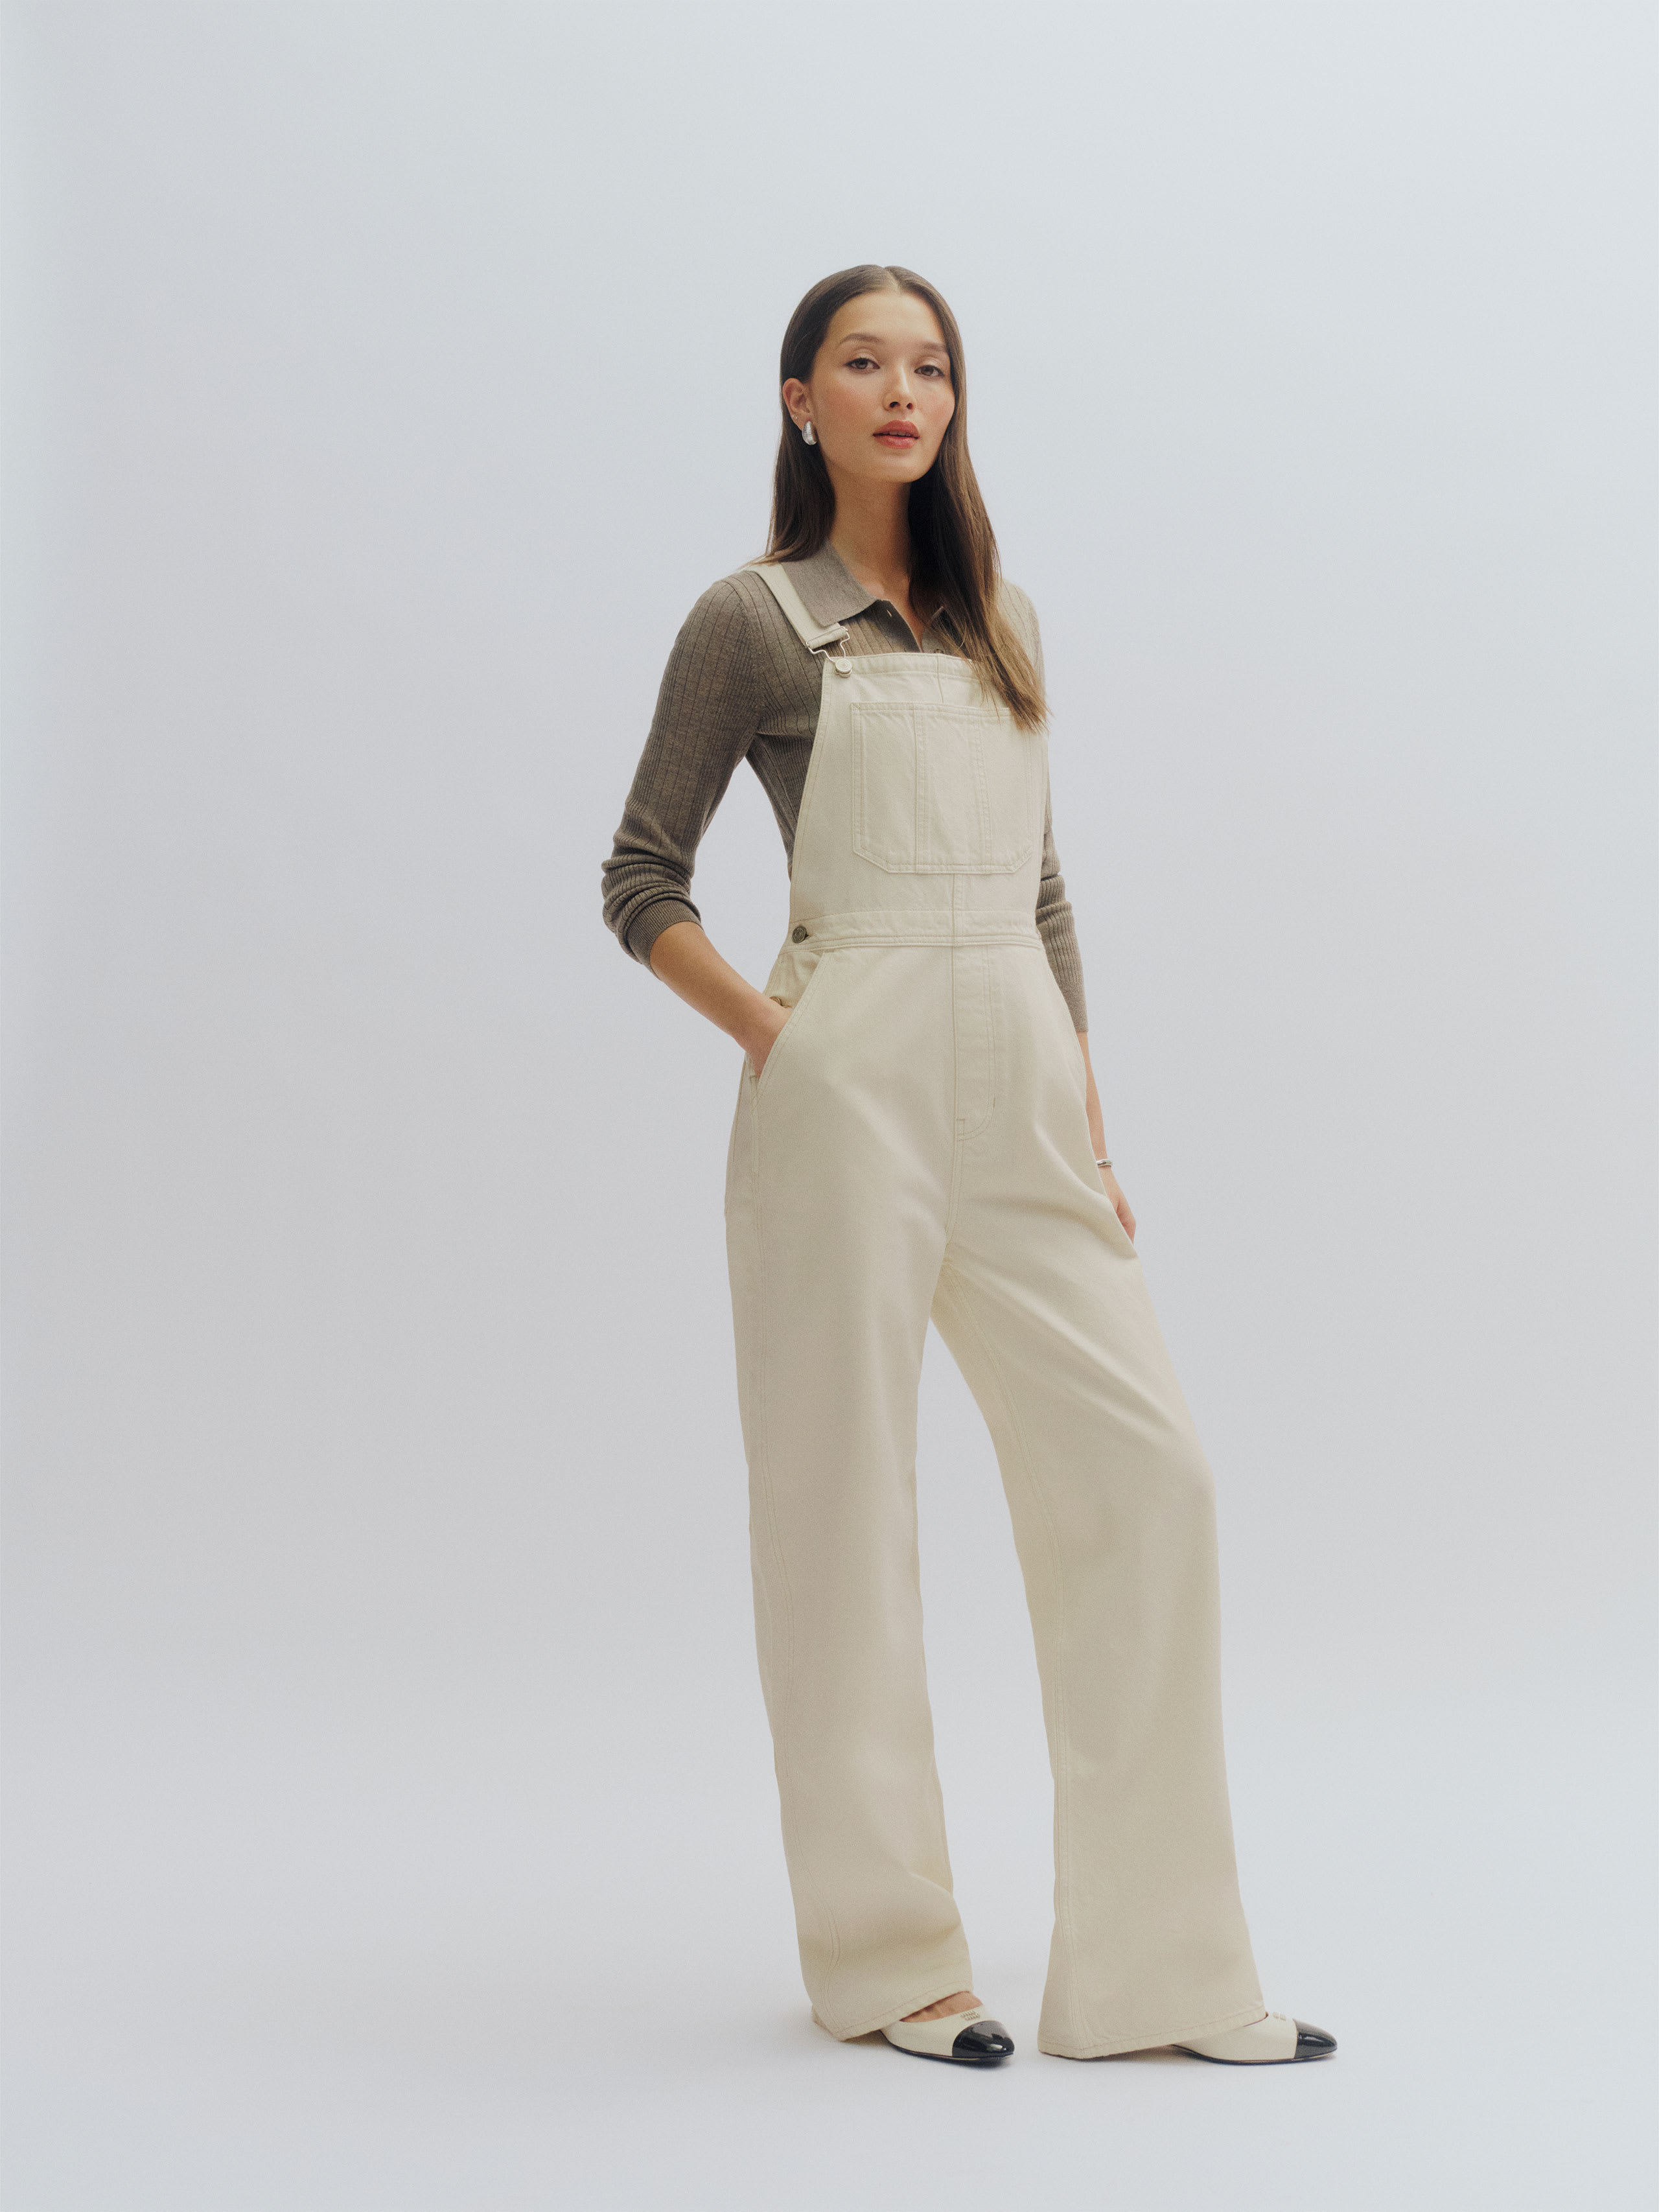 Reformation River Relaxed Denim Overalls In Fior Di Latte